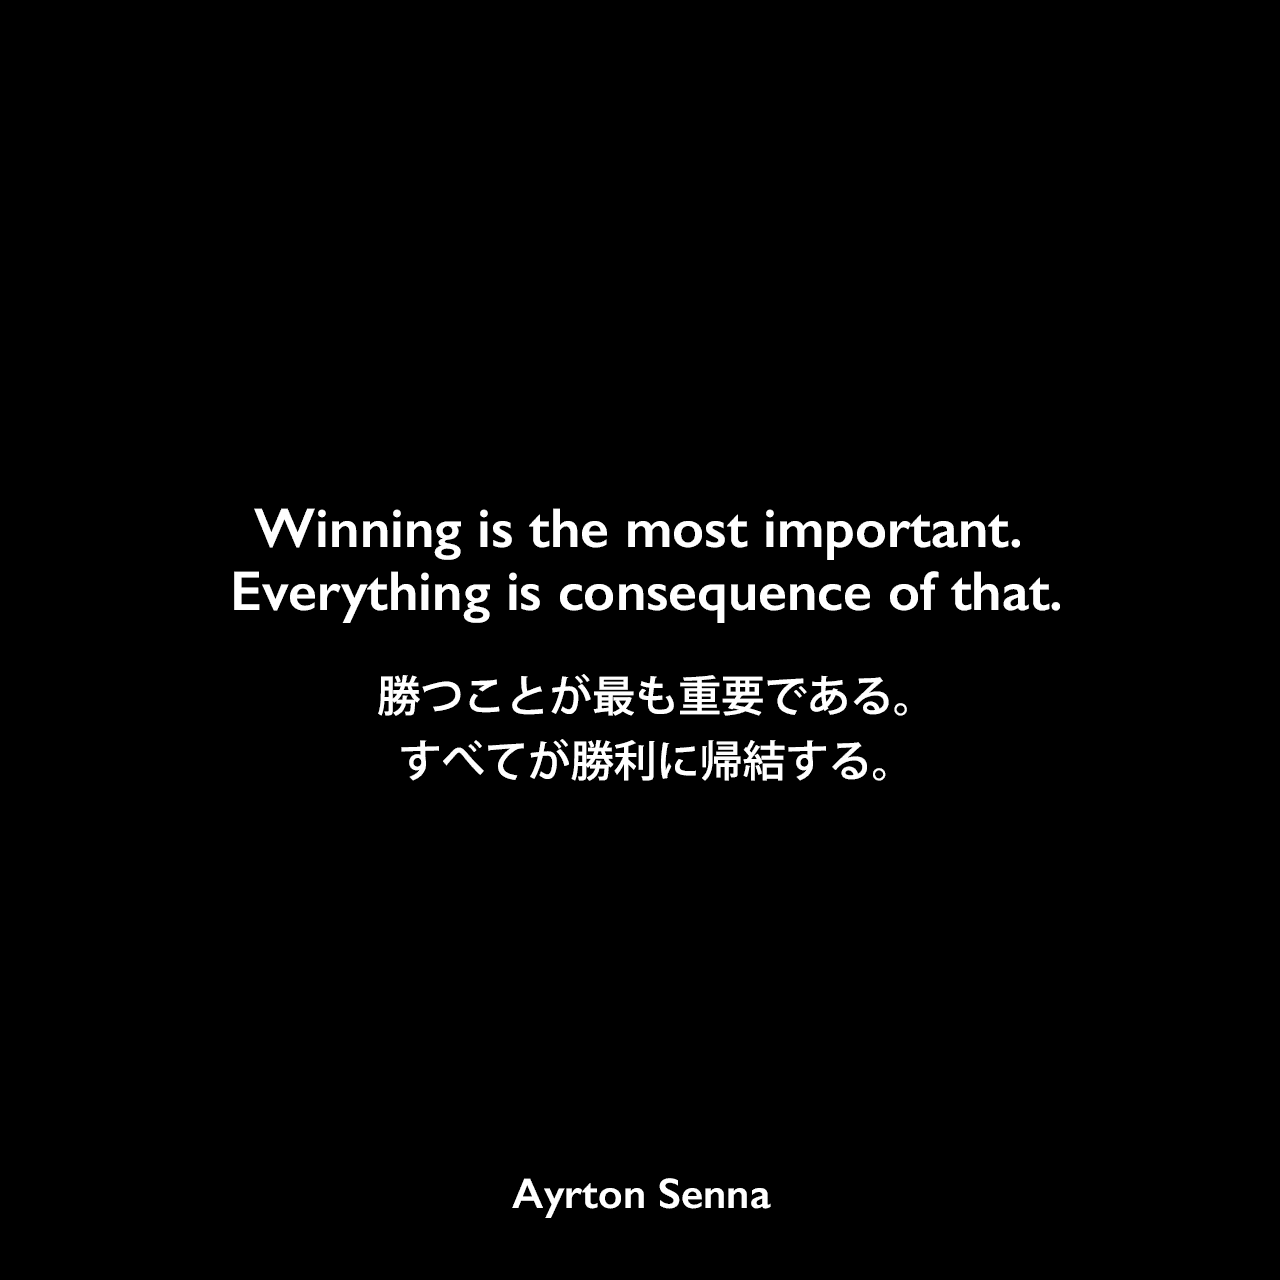 Winning is the most important. Everything is consequence of that.勝つことが最も重要である。すべてが勝利に帰結する。